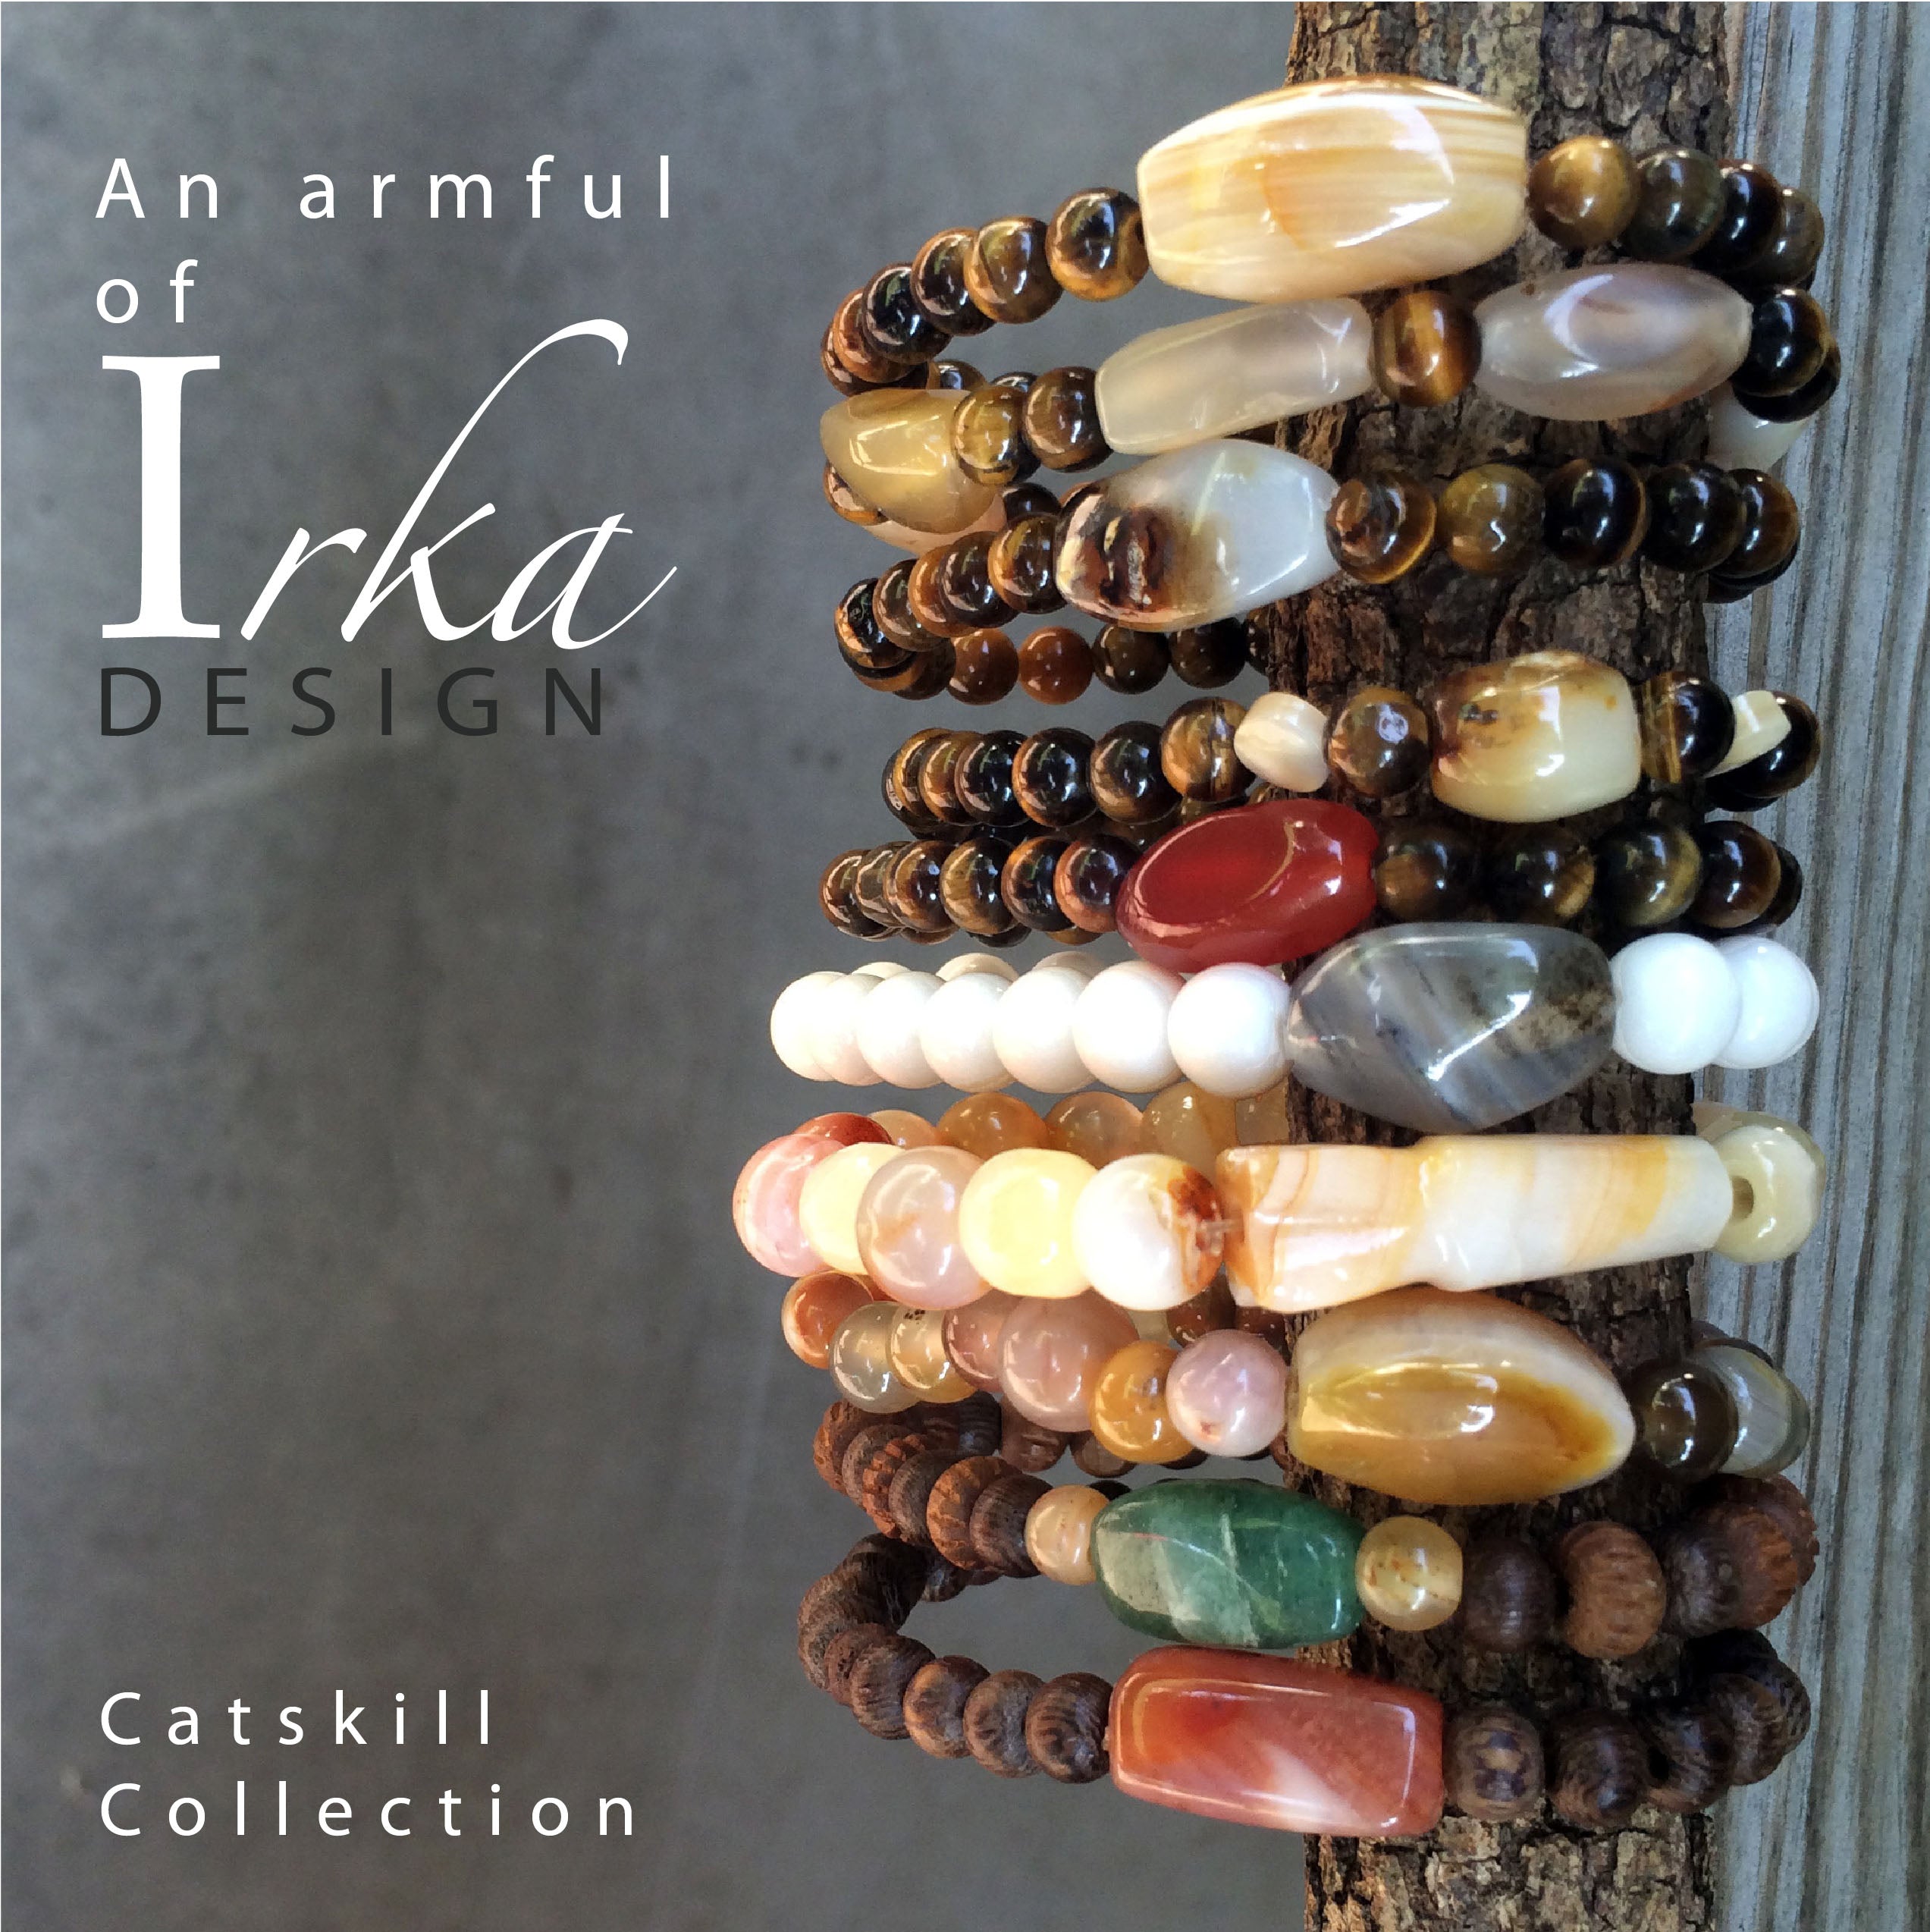 Catskill Collection